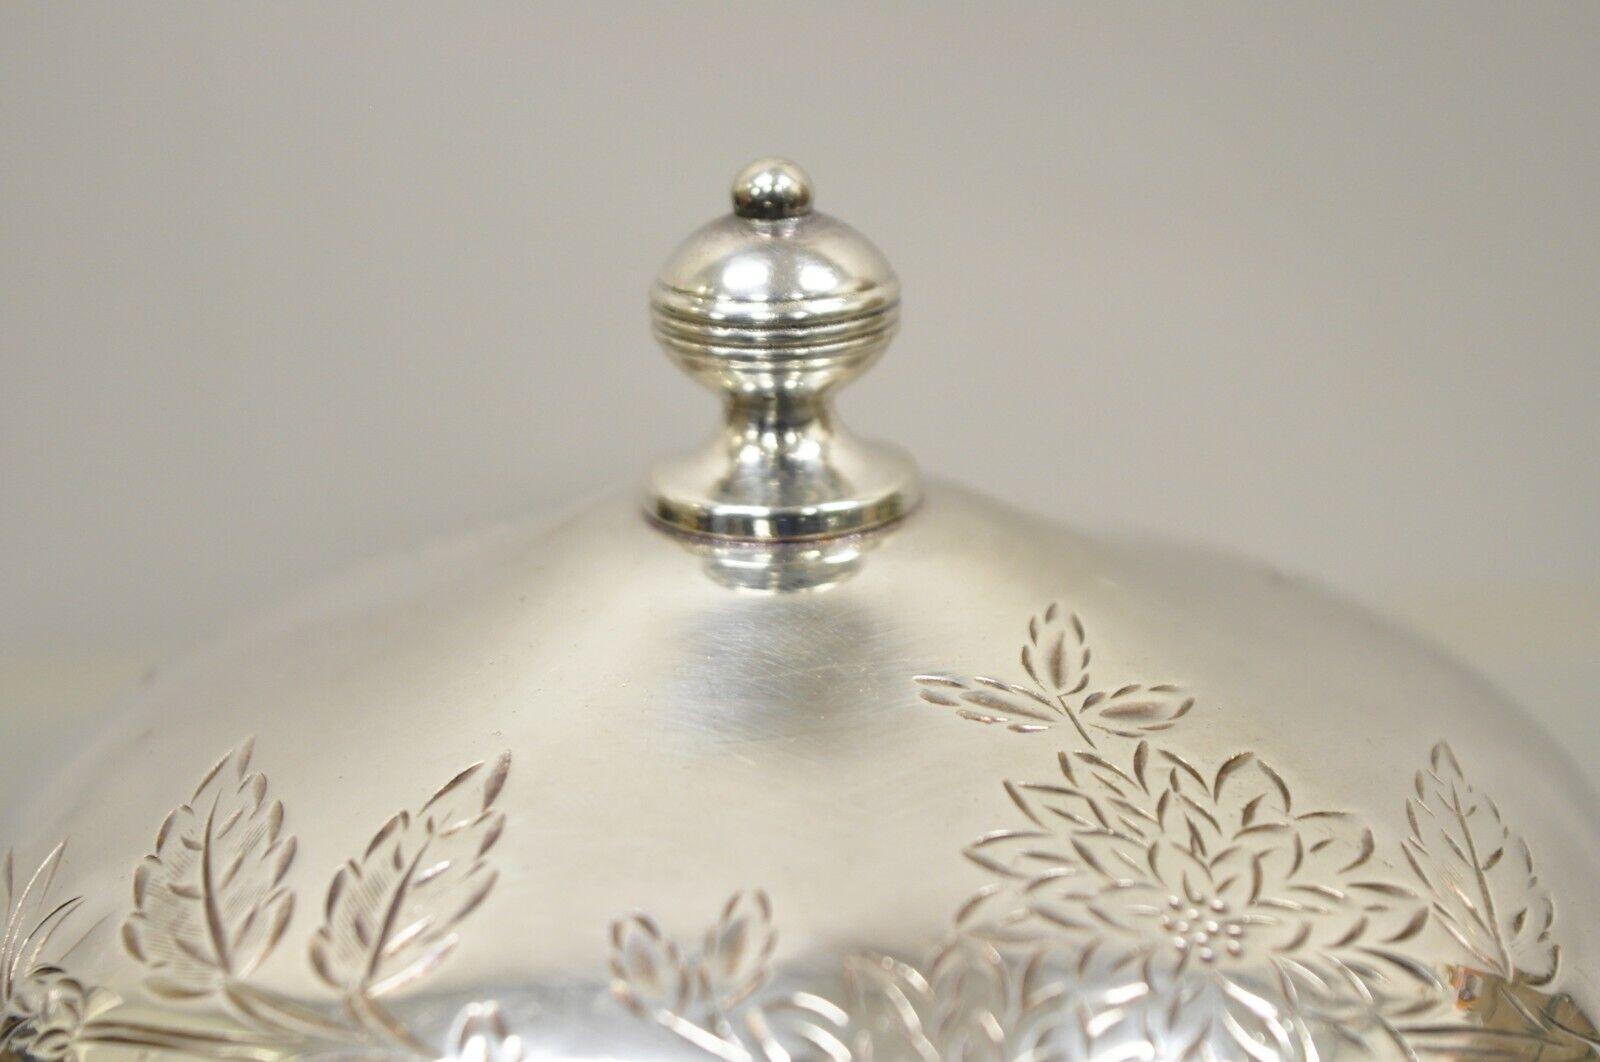 Antique Victorian Meriden B. Company 1972 Silver Plated Victorian Butter Dish 4